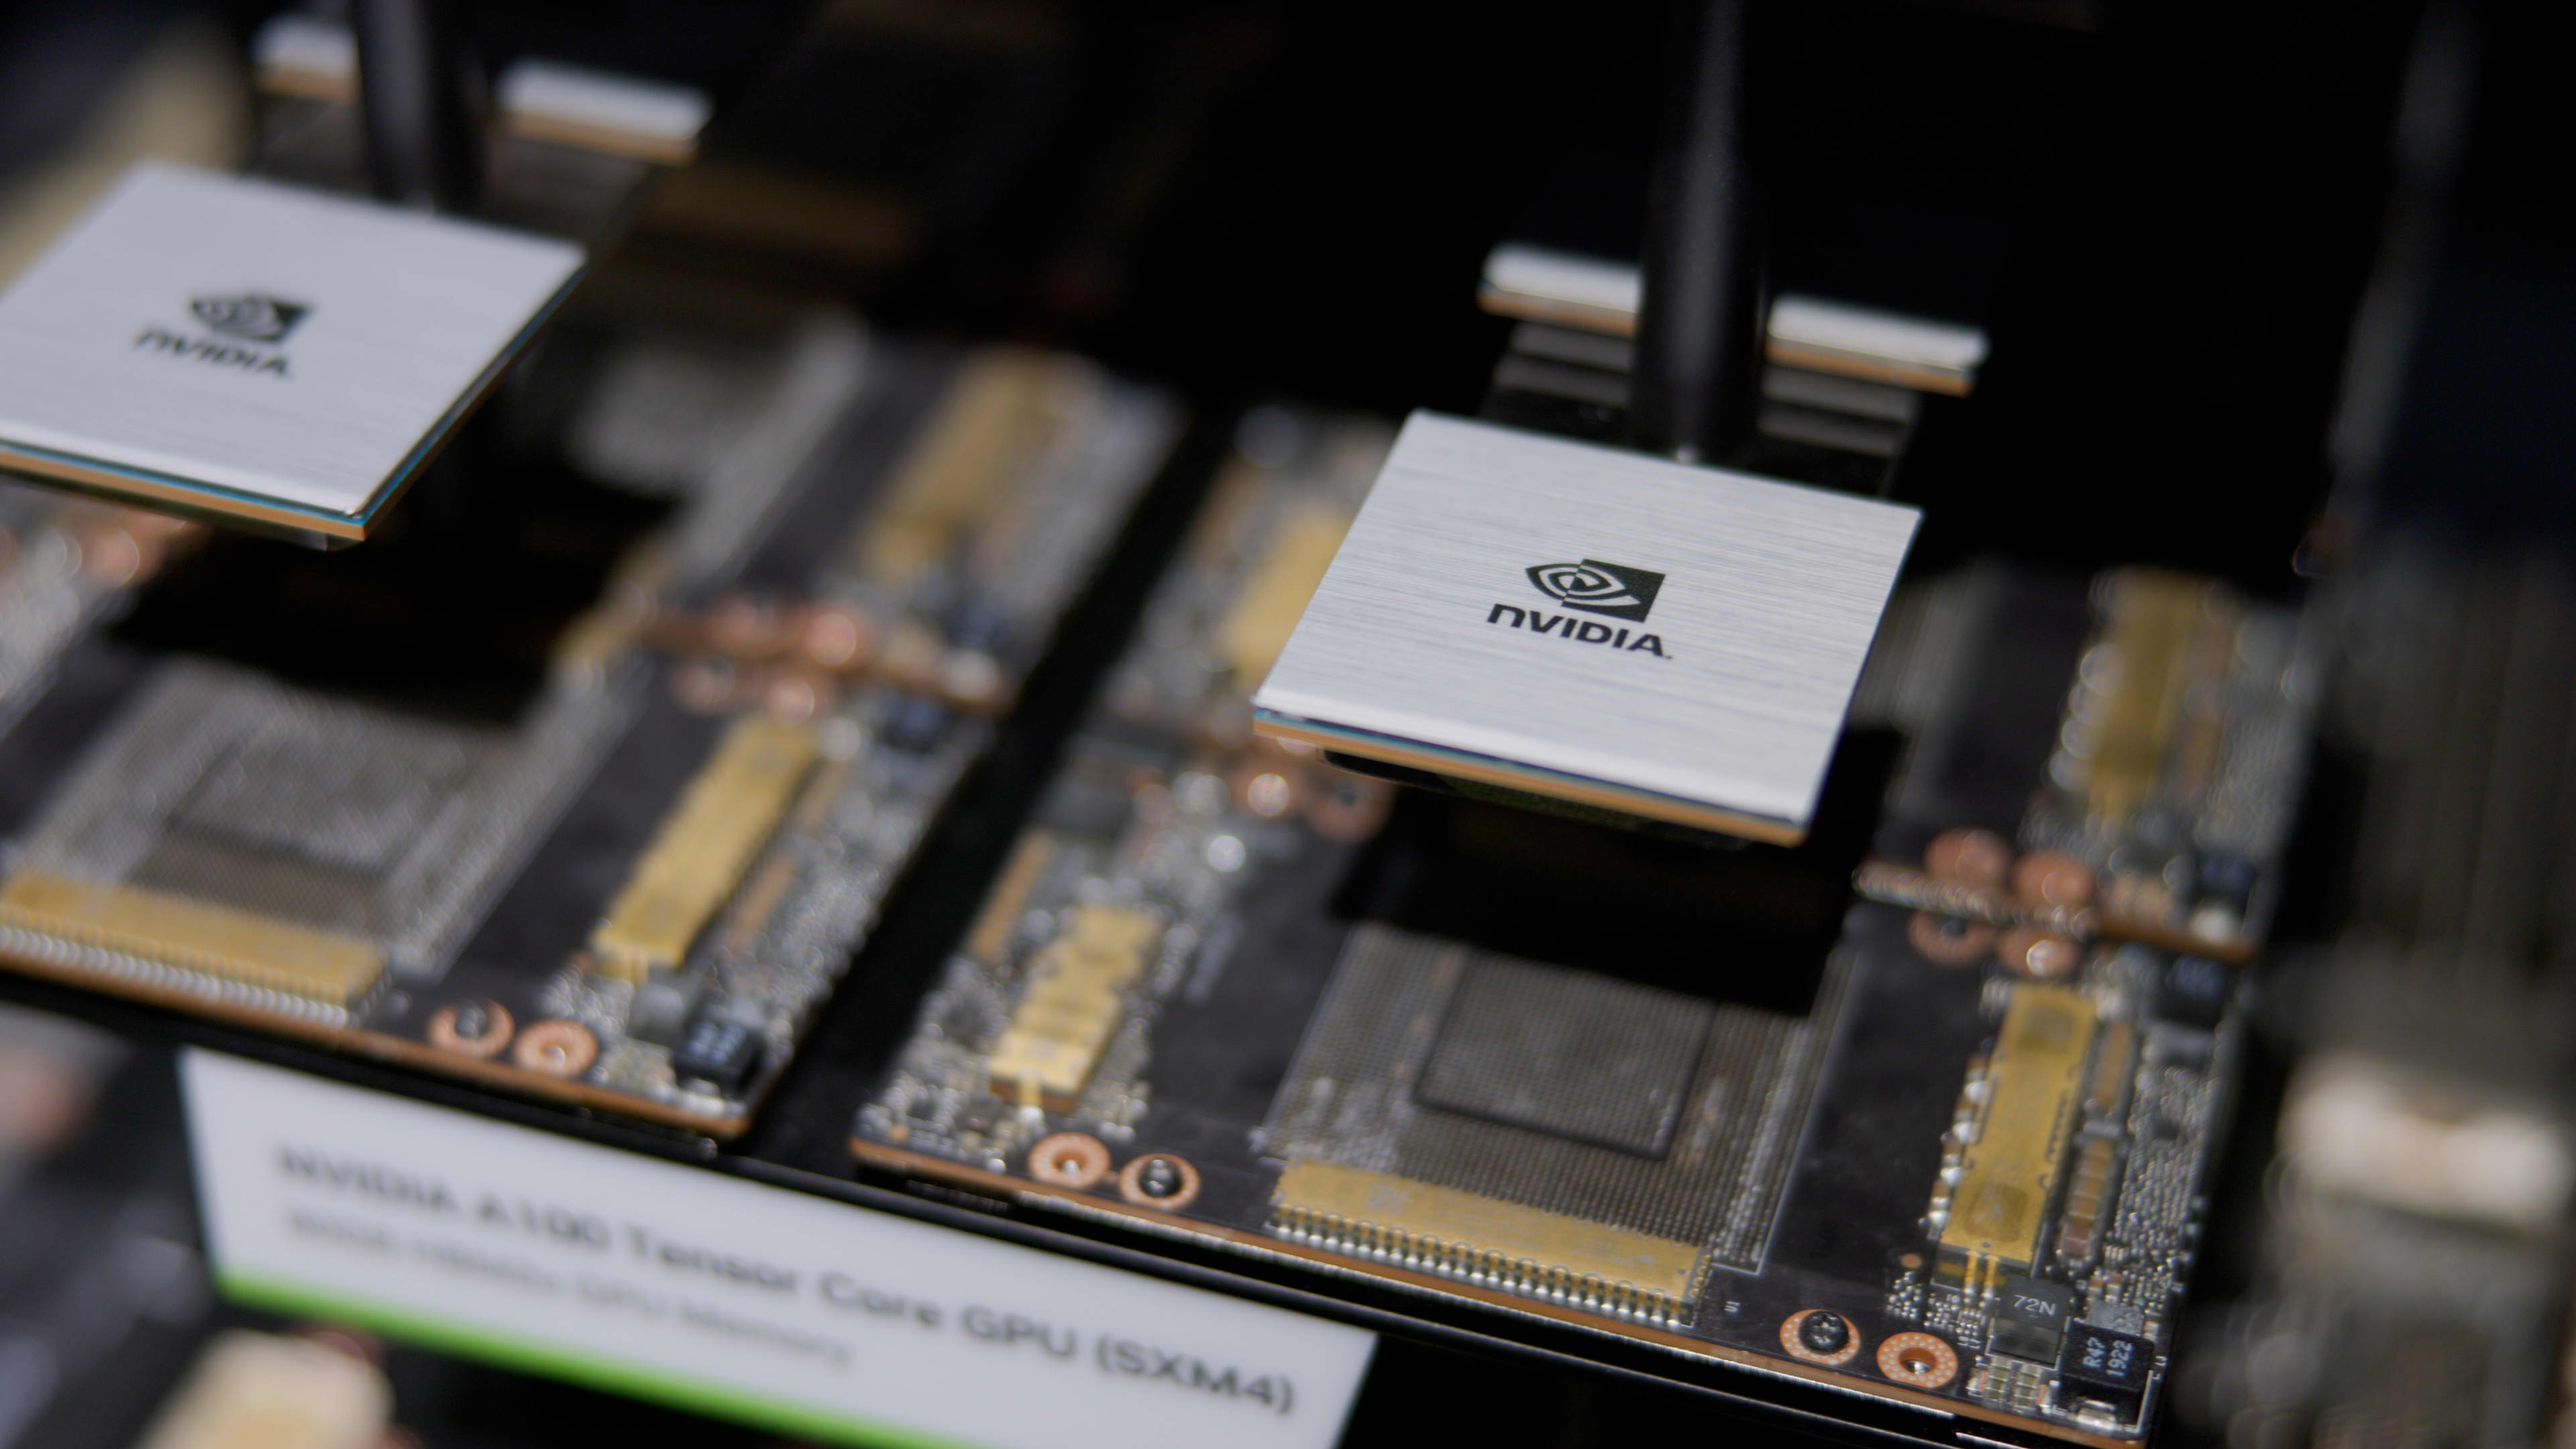 Analysts scramble to raise price targets on Nvidia after super earnings. JPMorgan goes to $500